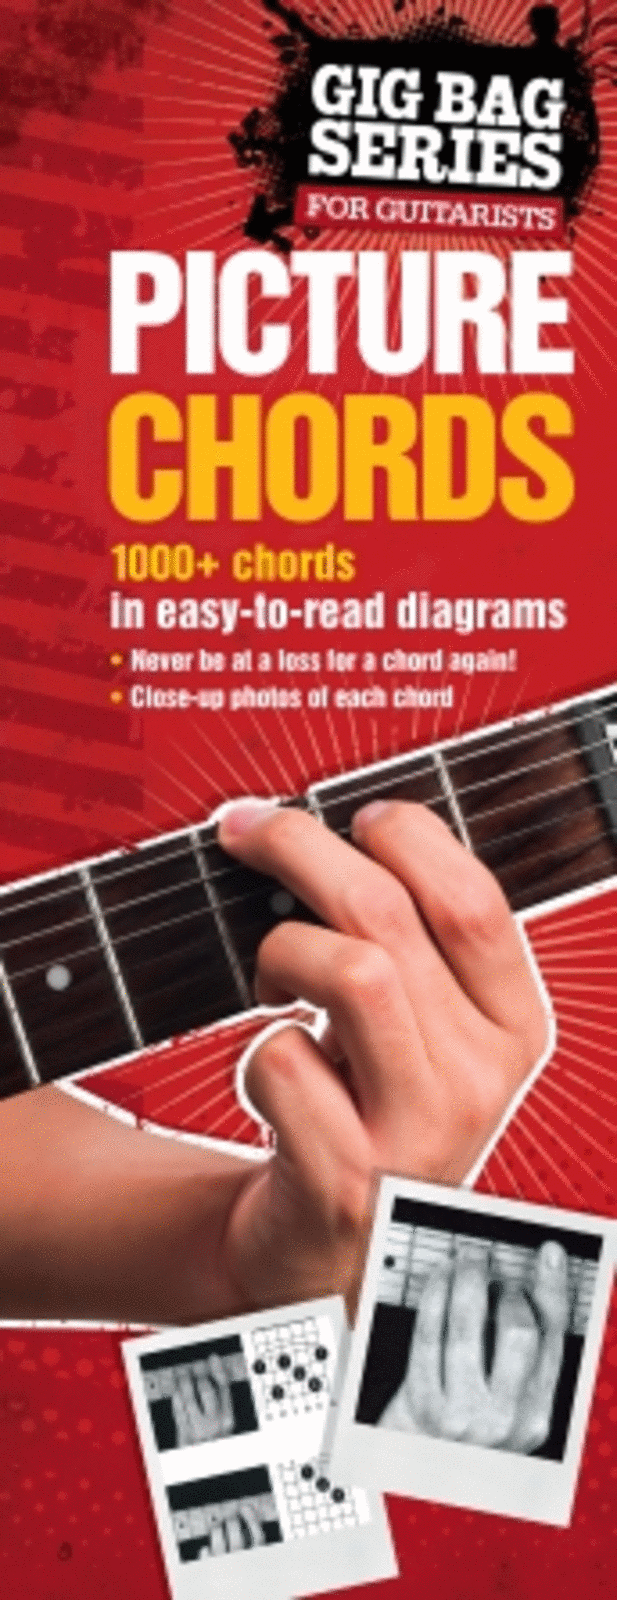 The Gig Bag Book Of Picture Chords For All Guitarists